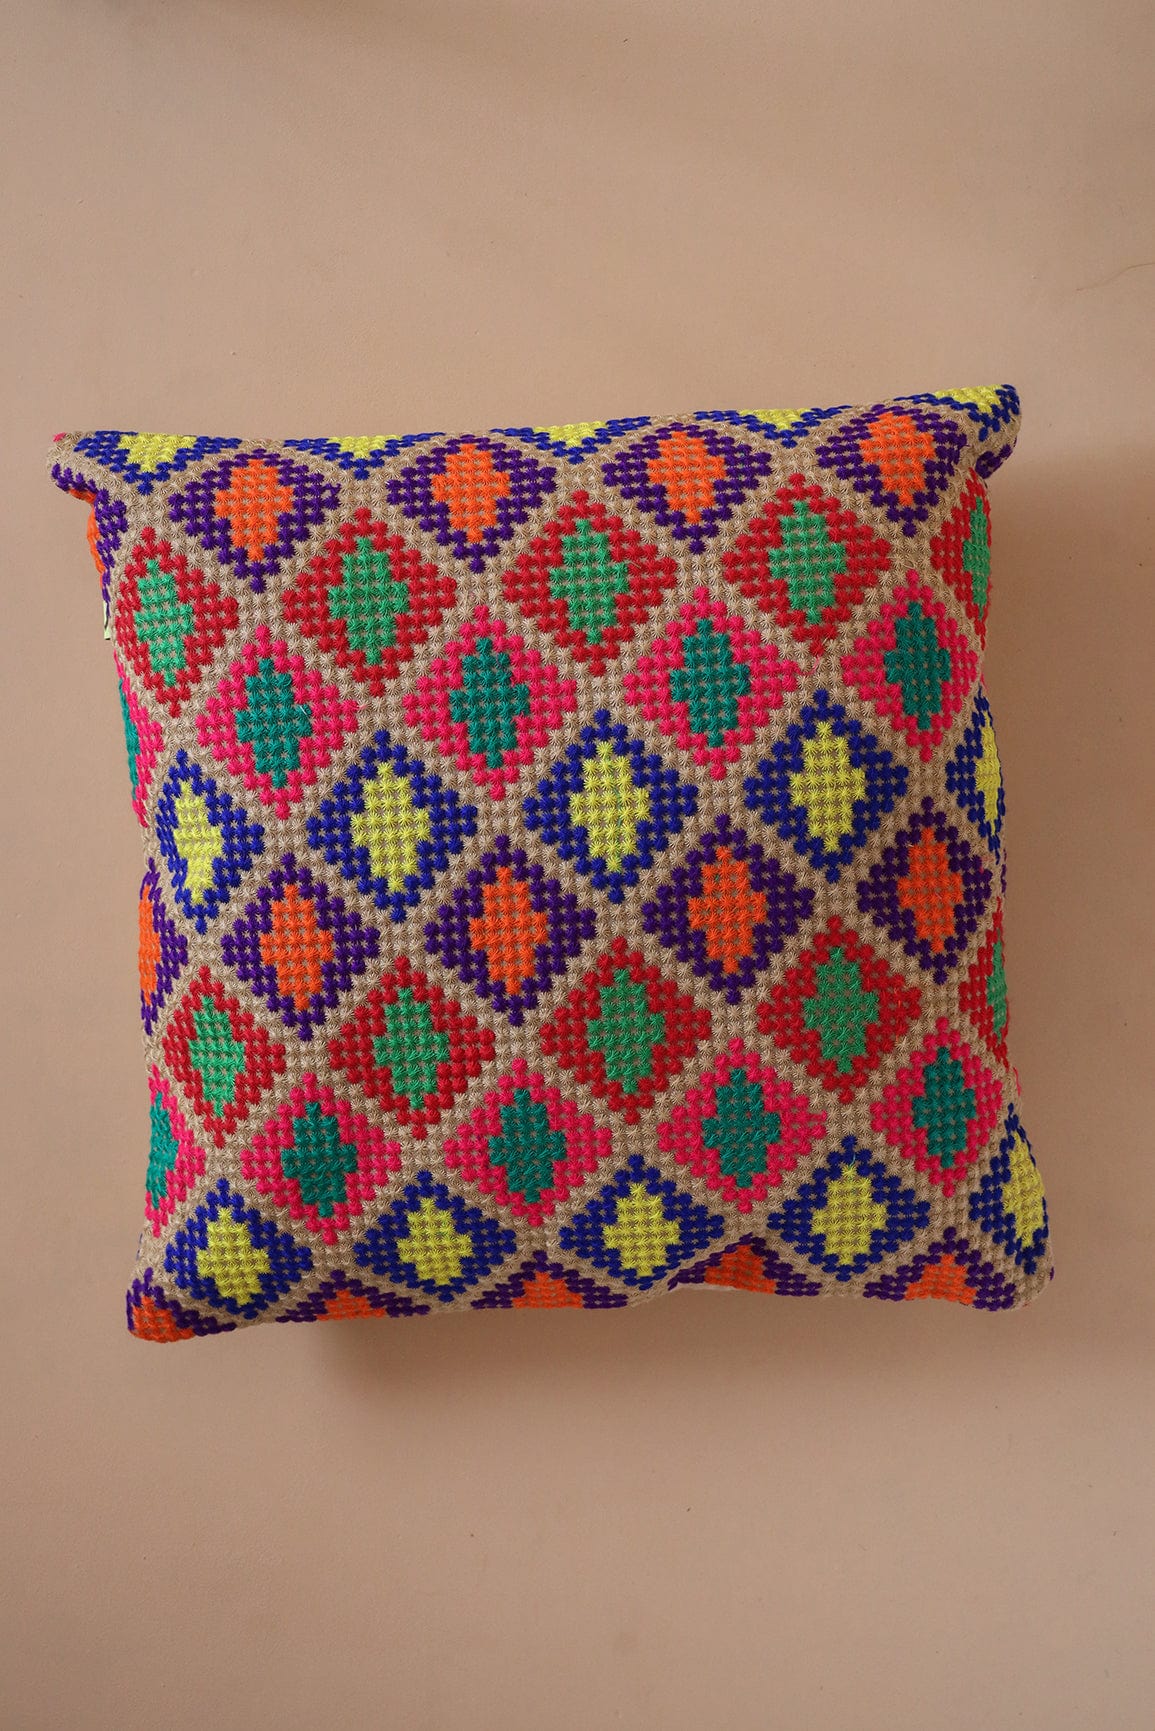 doeraa Dotted Pattern Multi-colour Embroidery on Off White cotton Cushion Cover (16*16 inches)